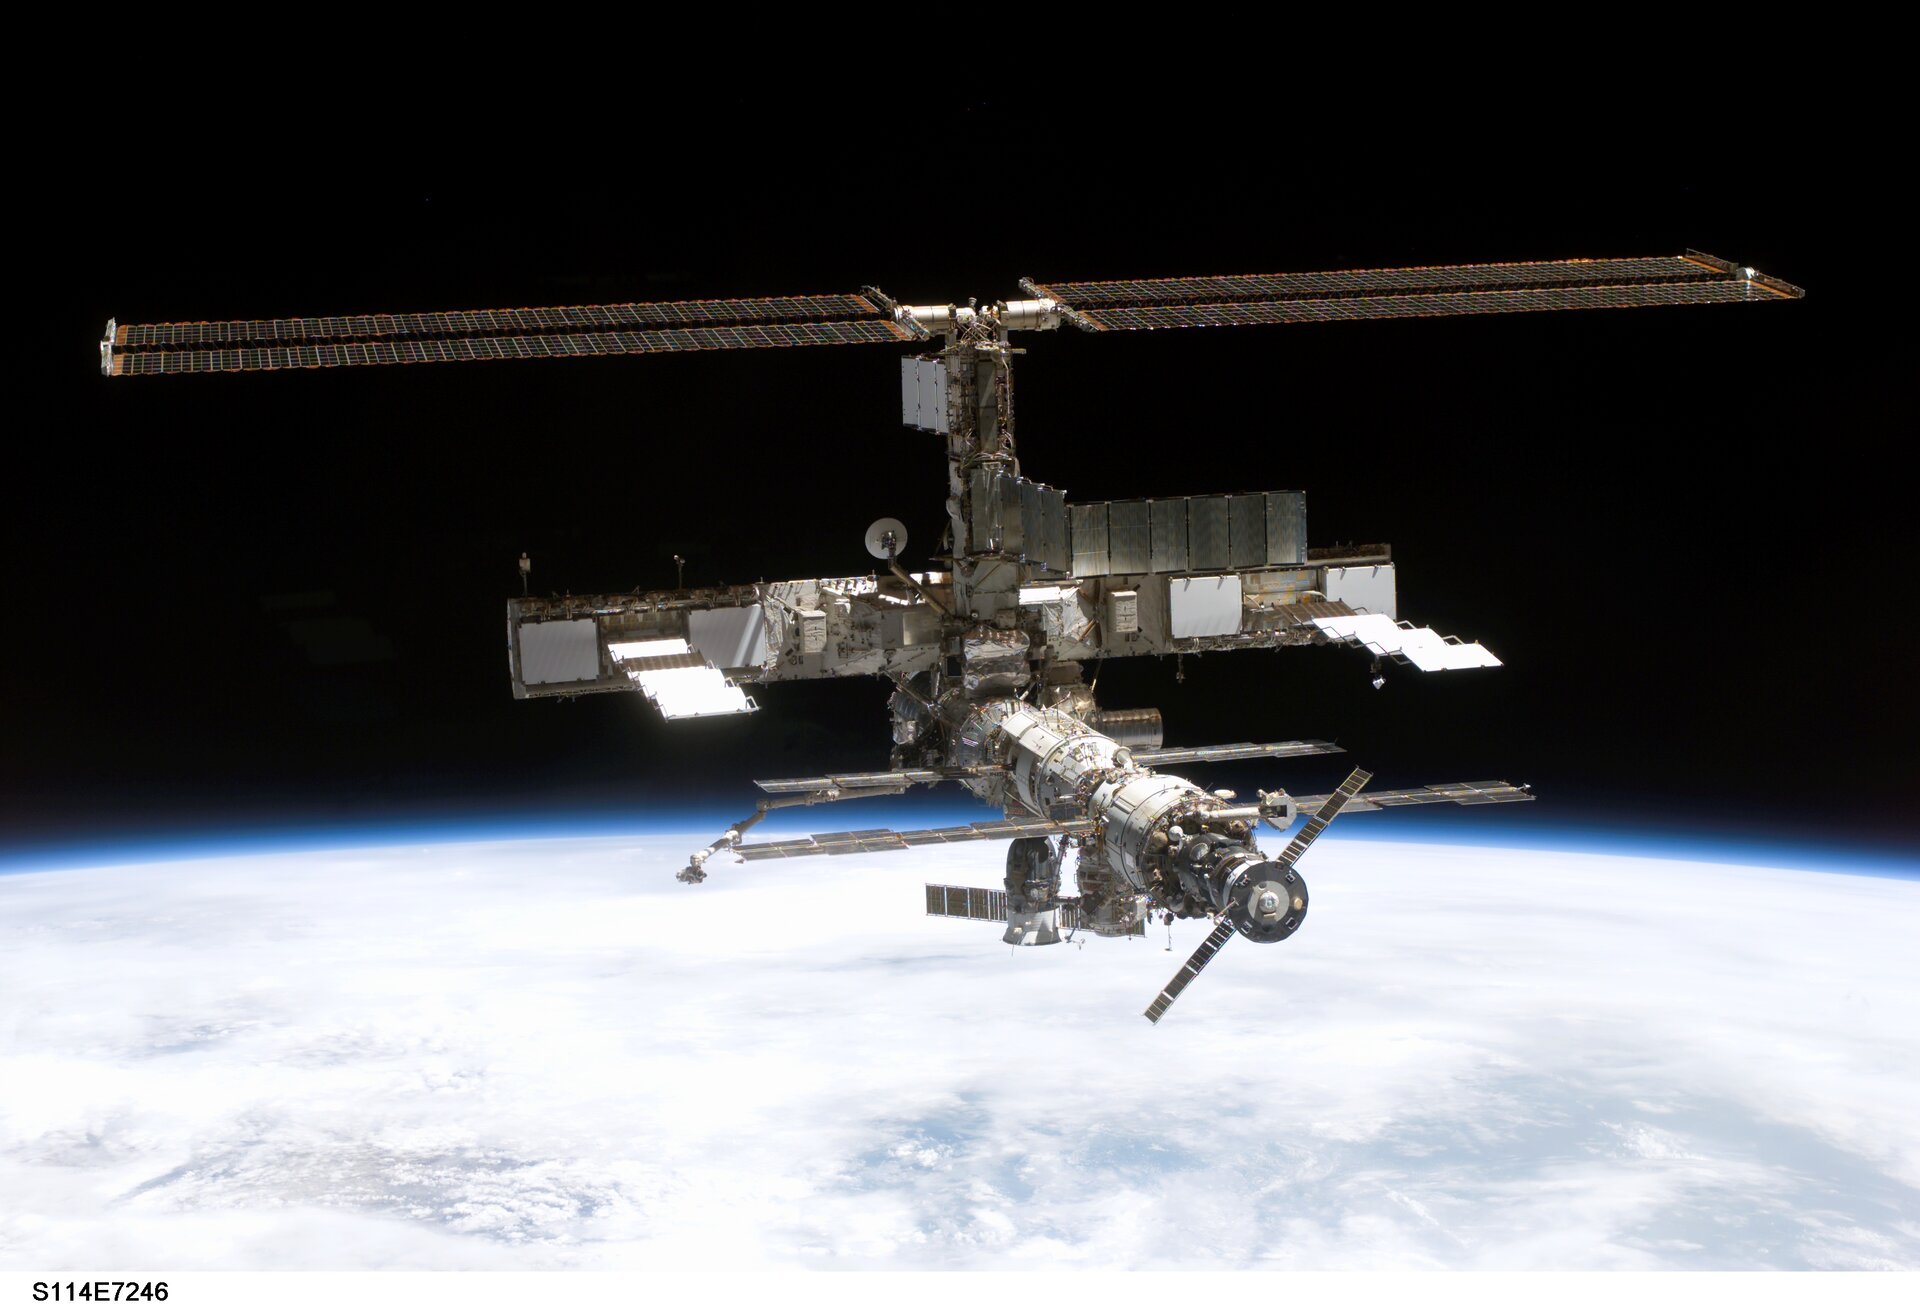 Photographs of the ISS in front of the Earth are very popular